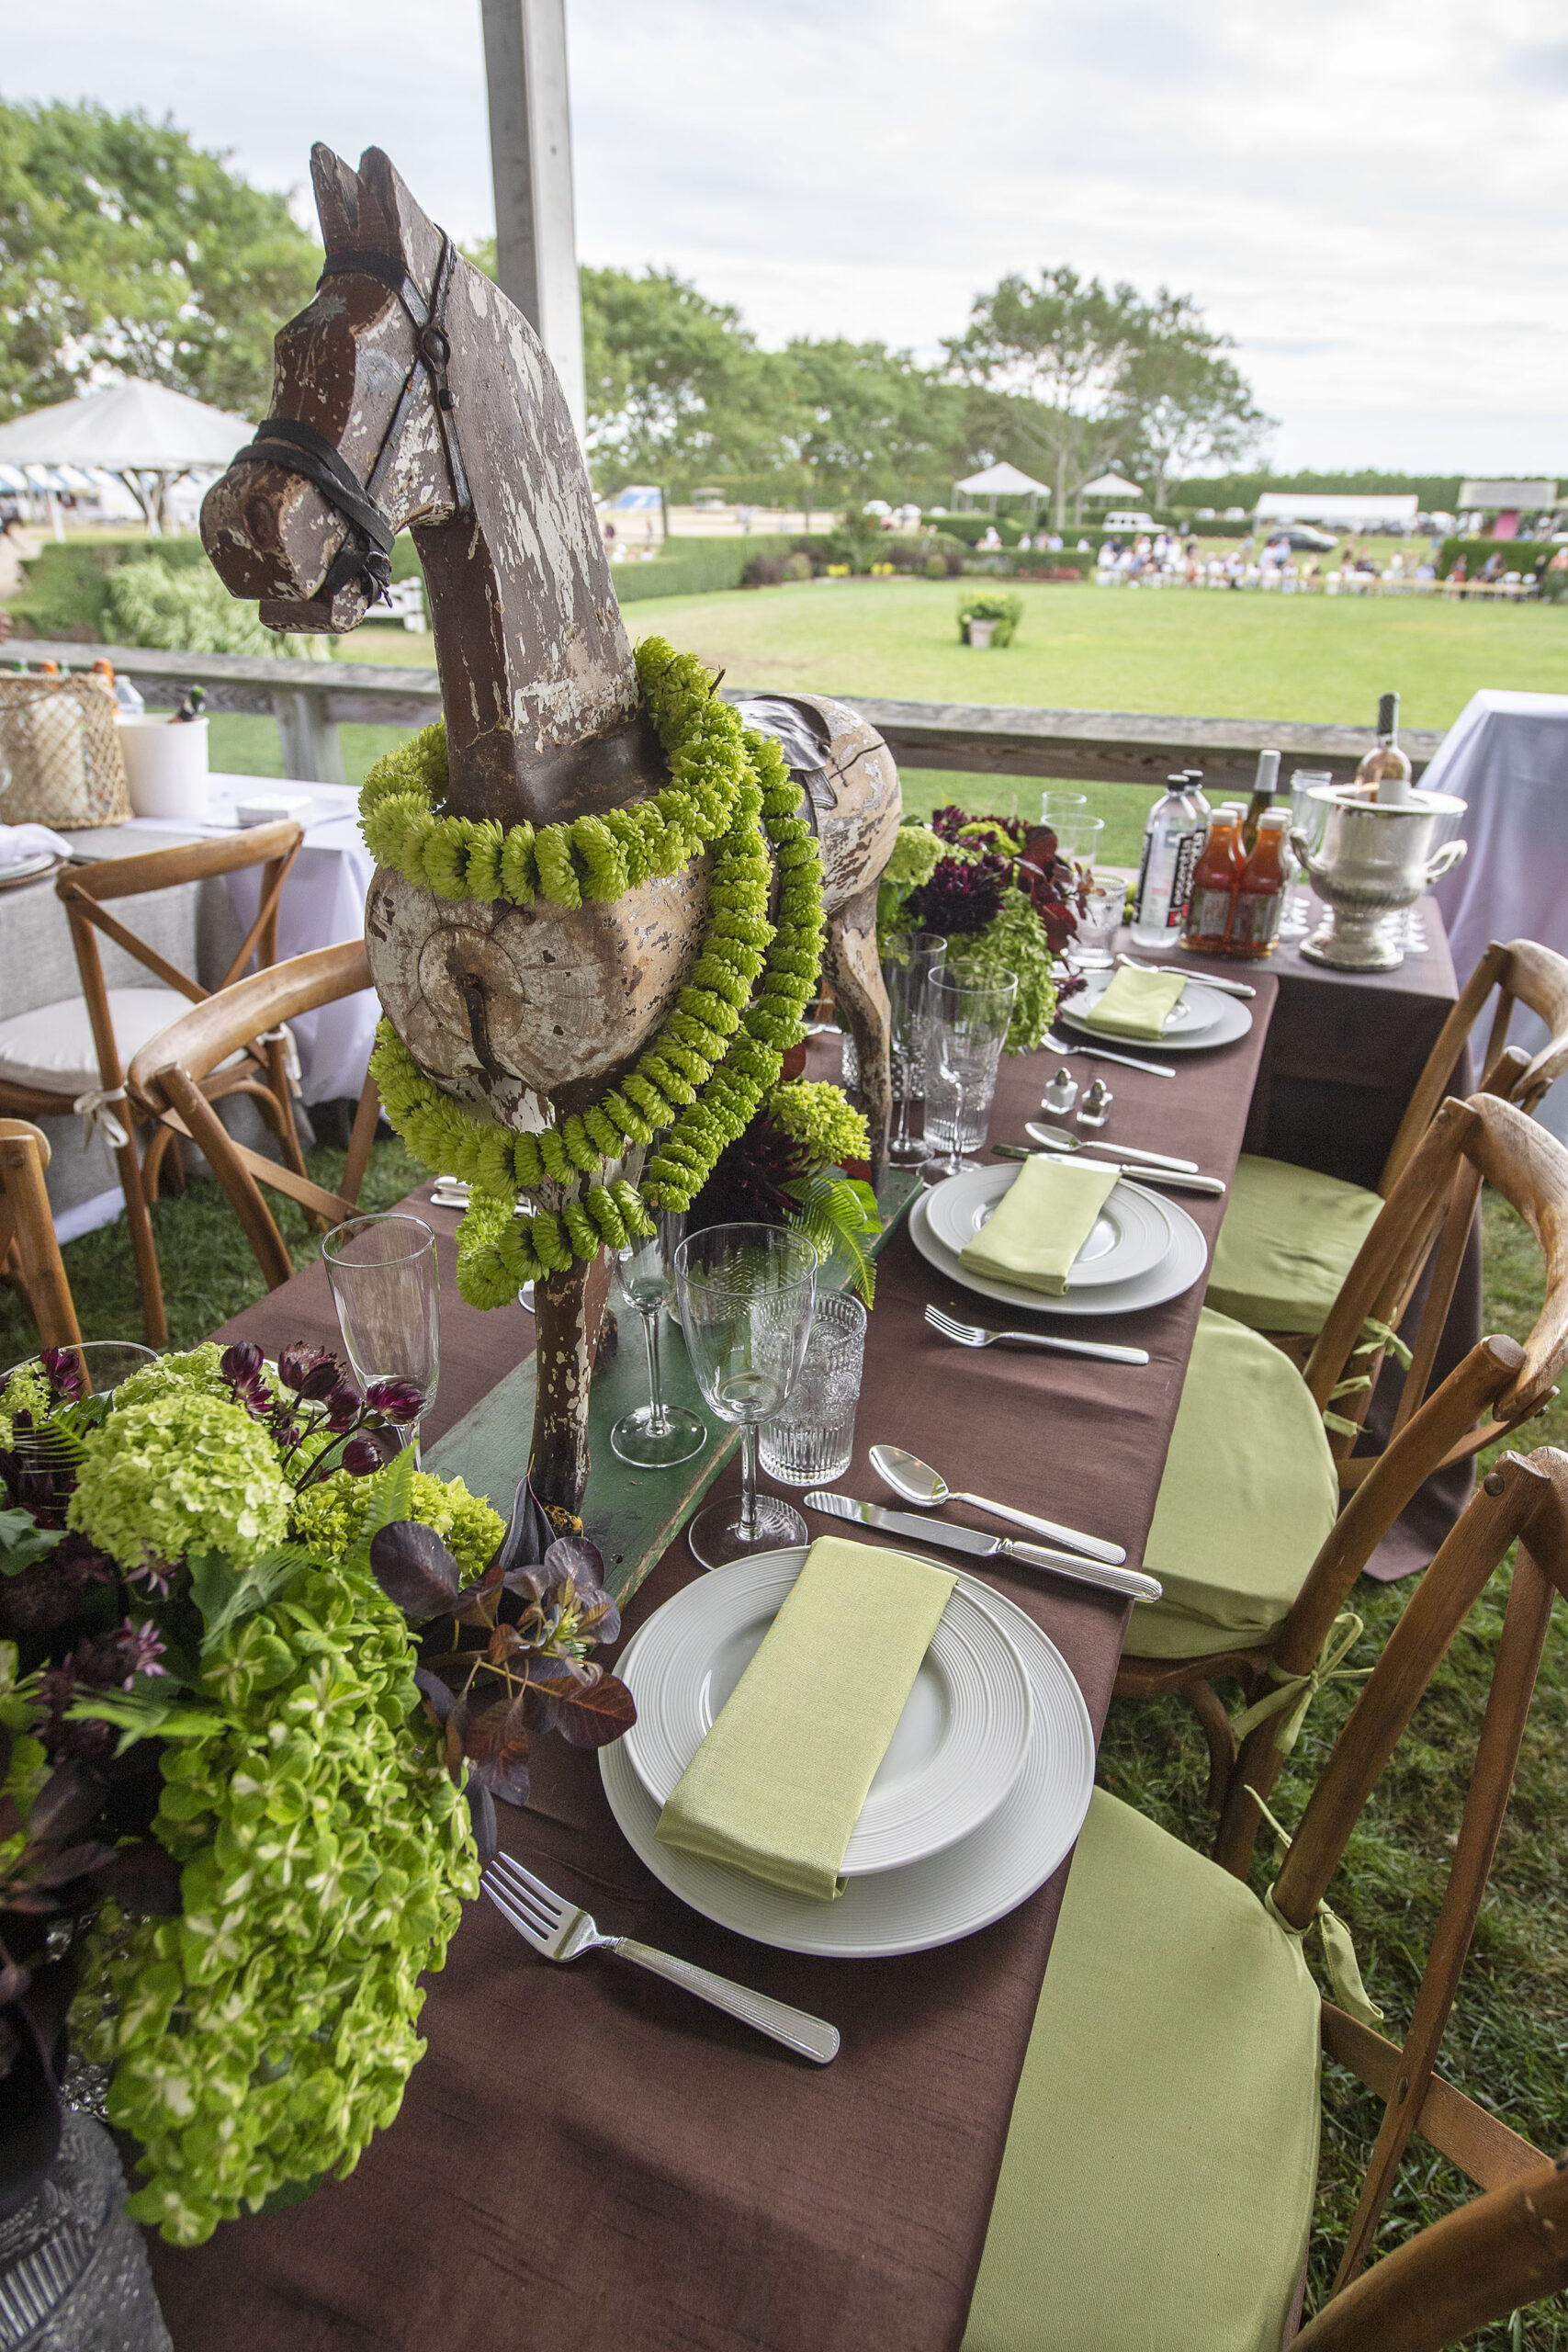 The table setting for the Turtle Lane Farm table in the VIP tent at the 2021 Hampton Classic on Grand Prix Sunday, September 5th, 2021